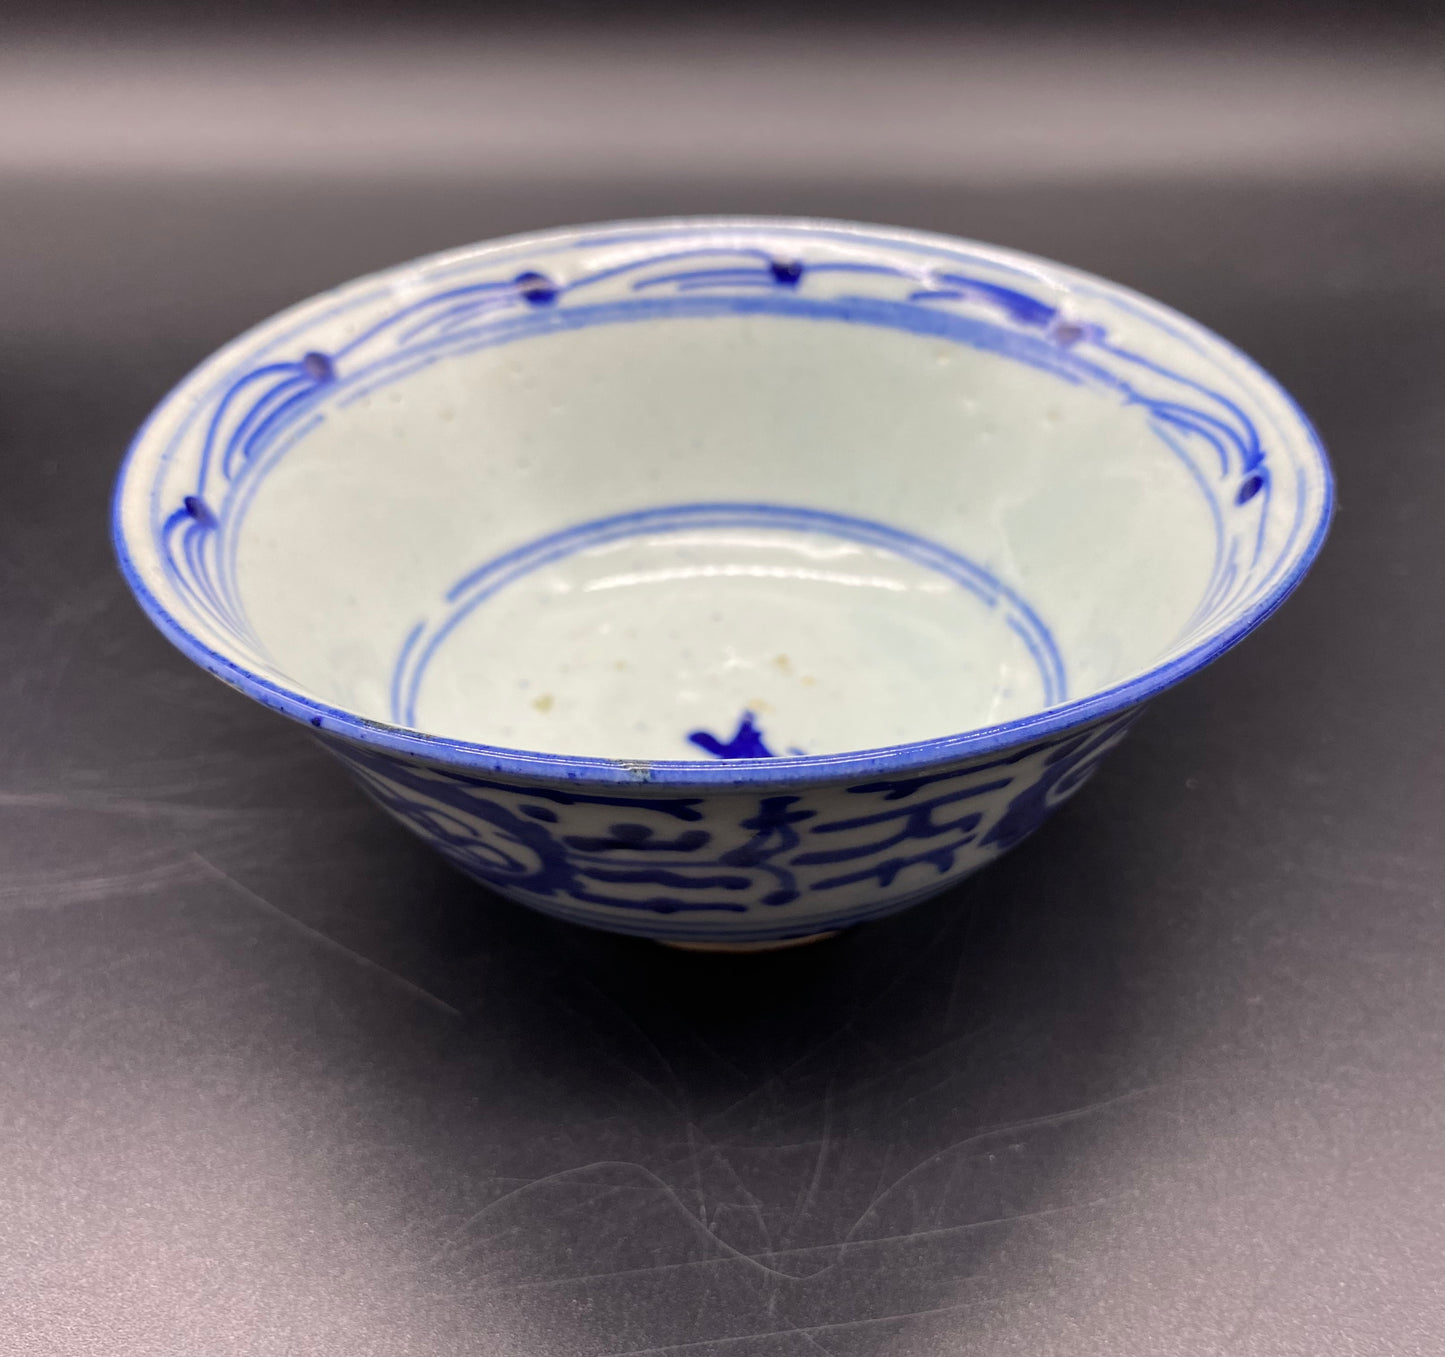 Chinese Qing Porcelain 3 Bowls 18th Century Blue / White